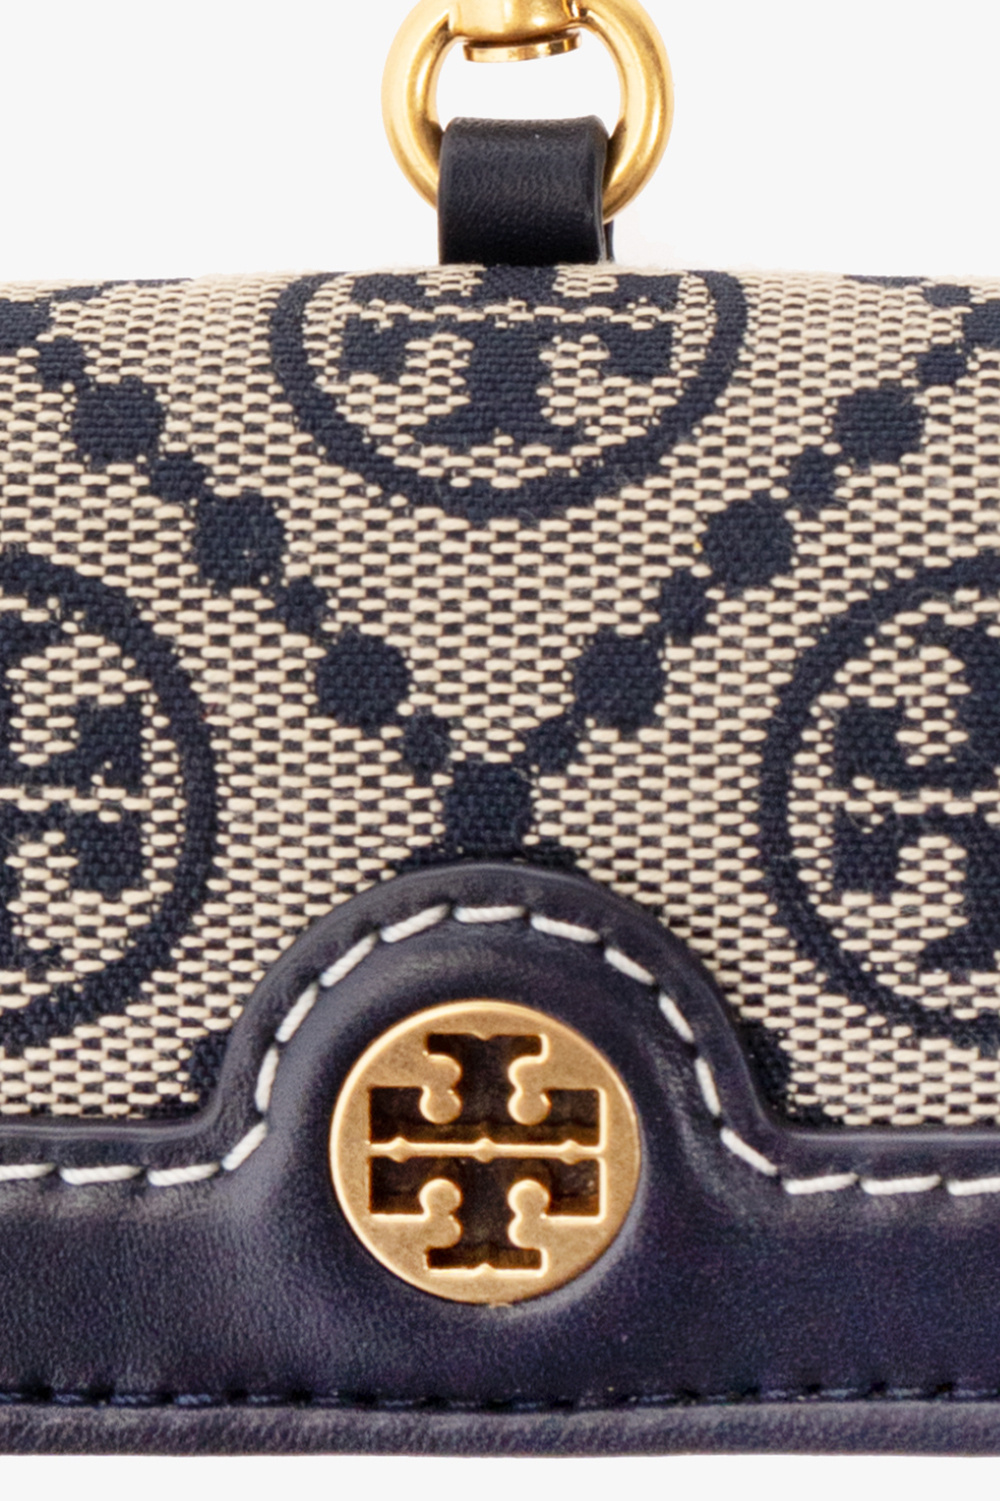 Tory Burch AirPods Pro case with strap